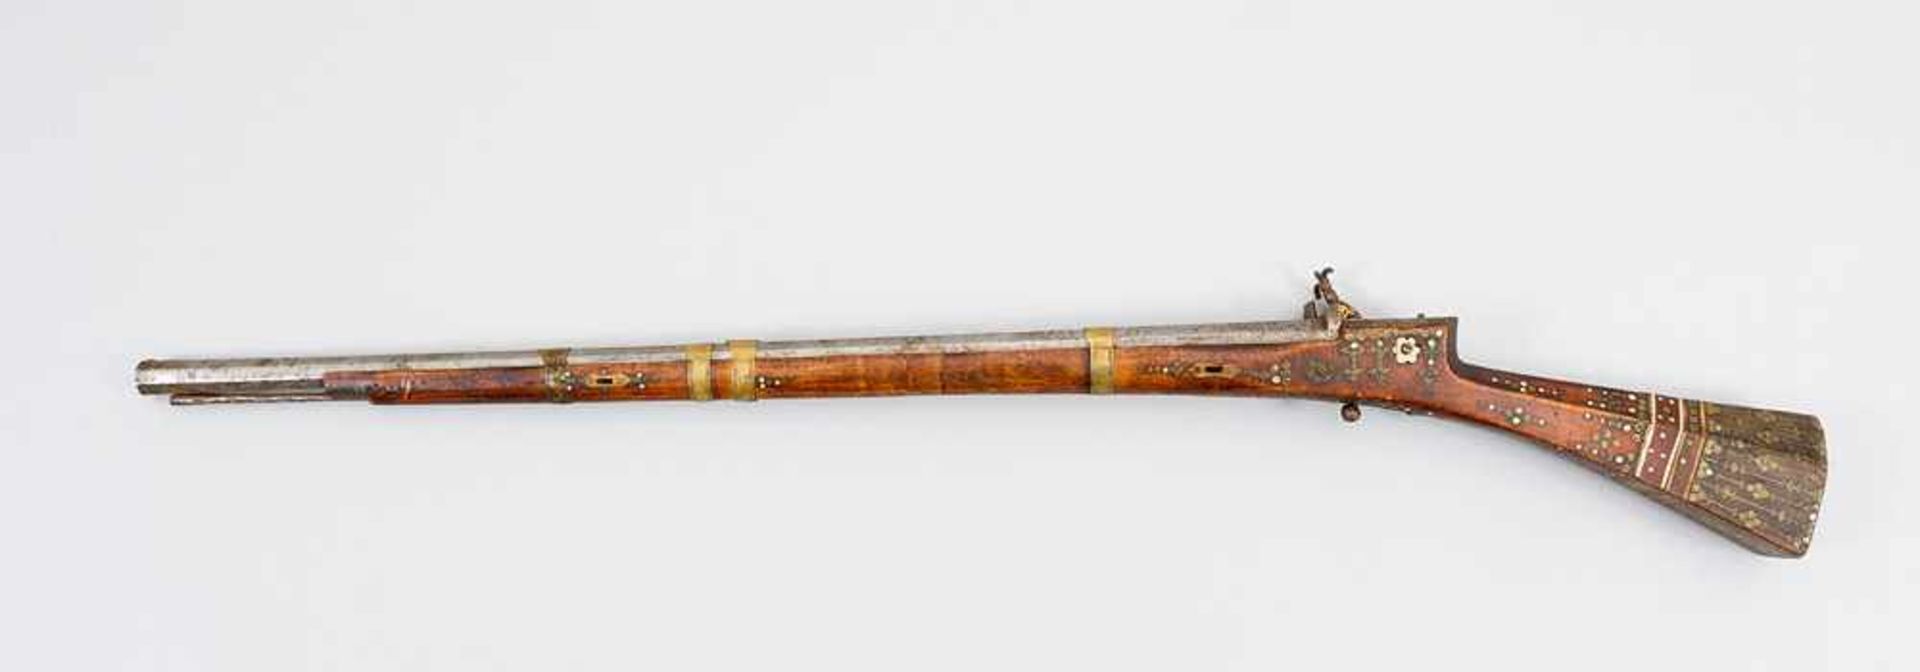 A Ottoman Riffle, wooden shaft with ornamental decorations in bronze, horn and wood. Iron filler and - Bild 3 aus 3